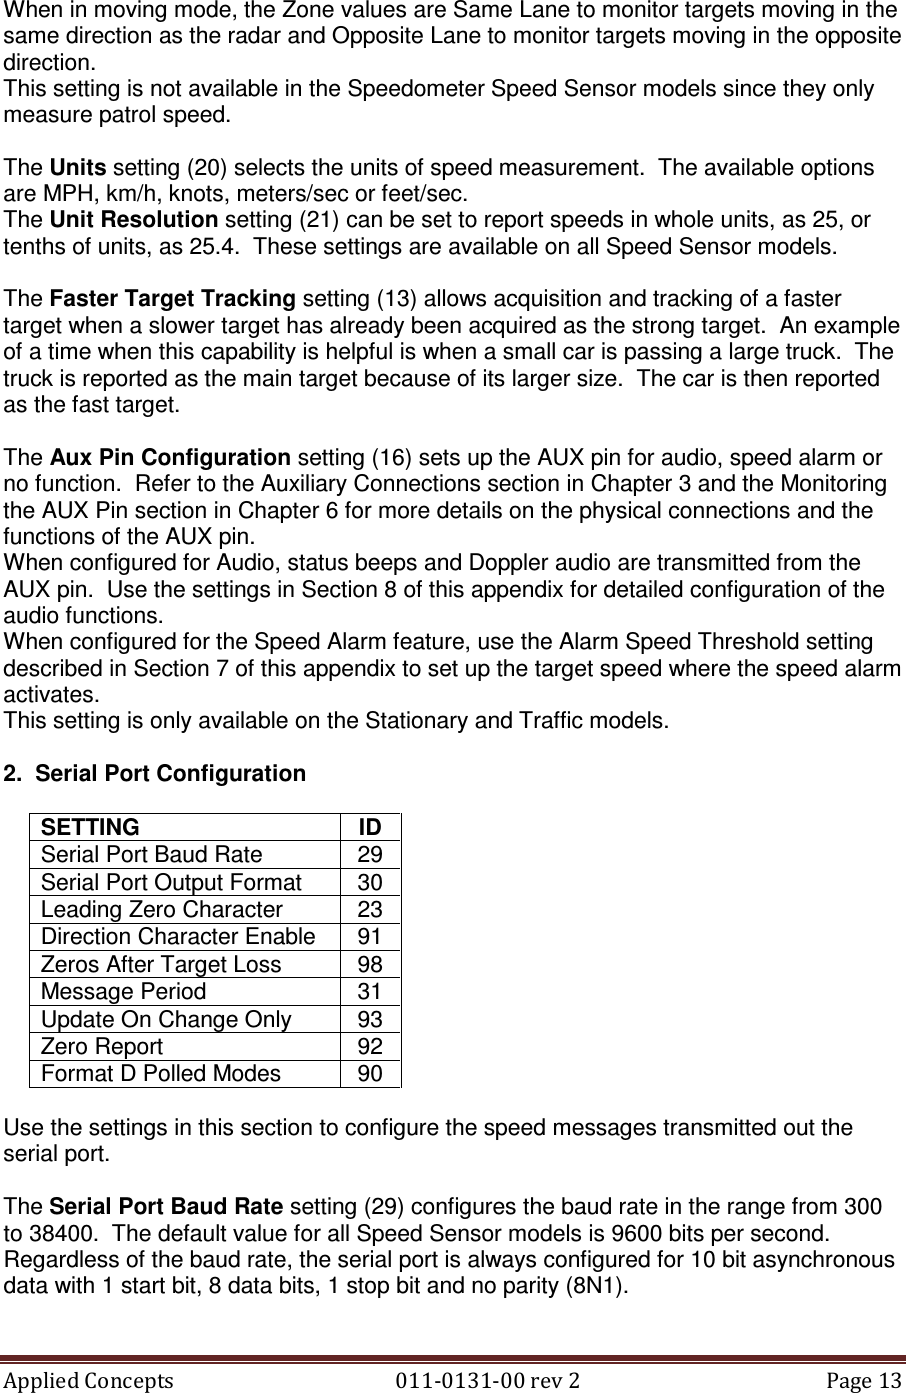 Applied Concepts                                            011-0131-00 rev 2  Page 13  When in moving mode, the Zone values are Same Lane to monitor targets moving in the same direction as the radar and Opposite Lane to monitor targets moving in the opposite direction. This setting is not available in the Speedometer Speed Sensor models since they only measure patrol speed.  The Units setting (20) selects the units of speed measurement.  The available options are MPH, km/h, knots, meters/sec or feet/sec. The Unit Resolution setting (21) can be set to report speeds in whole units, as 25, or tenths of units, as 25.4.  These settings are available on all Speed Sensor models.  The Faster Target Tracking setting (13) allows acquisition and tracking of a faster target when a slower target has already been acquired as the strong target.  An example of a time when this capability is helpful is when a small car is passing a large truck.  The truck is reported as the main target because of its larger size.  The car is then reported as the fast target.  The Aux Pin Configuration setting (16) sets up the AUX pin for audio, speed alarm or no function.  Refer to the Auxiliary Connections section in Chapter 3 and the Monitoring the AUX Pin section in Chapter 6 for more details on the physical connections and the functions of the AUX pin. When configured for Audio, status beeps and Doppler audio are transmitted from the AUX pin.  Use the settings in Section 8 of this appendix for detailed configuration of the audio functions. When configured for the Speed Alarm feature, use the Alarm Speed Threshold setting described in Section 7 of this appendix to set up the target speed where the speed alarm activates. This setting is only available on the Stationary and Traffic models.    2.  Serial Port Configuration  SETTING  ID Serial Port Baud Rate  29 Serial Port Output Format  30 Leading Zero Character  23 Direction Character Enable  91 Zeros After Target Loss  98 Message Period  31 Update On Change Only  93 Zero Report  92 Format D Polled Modes  90  Use the settings in this section to configure the speed messages transmitted out the serial port.  The Serial Port Baud Rate setting (29) configures the baud rate in the range from 300 to 38400.  The default value for all Speed Sensor models is 9600 bits per second.  Regardless of the baud rate, the serial port is always configured for 10 bit asynchronous data with 1 start bit, 8 data bits, 1 stop bit and no parity (8N1).  